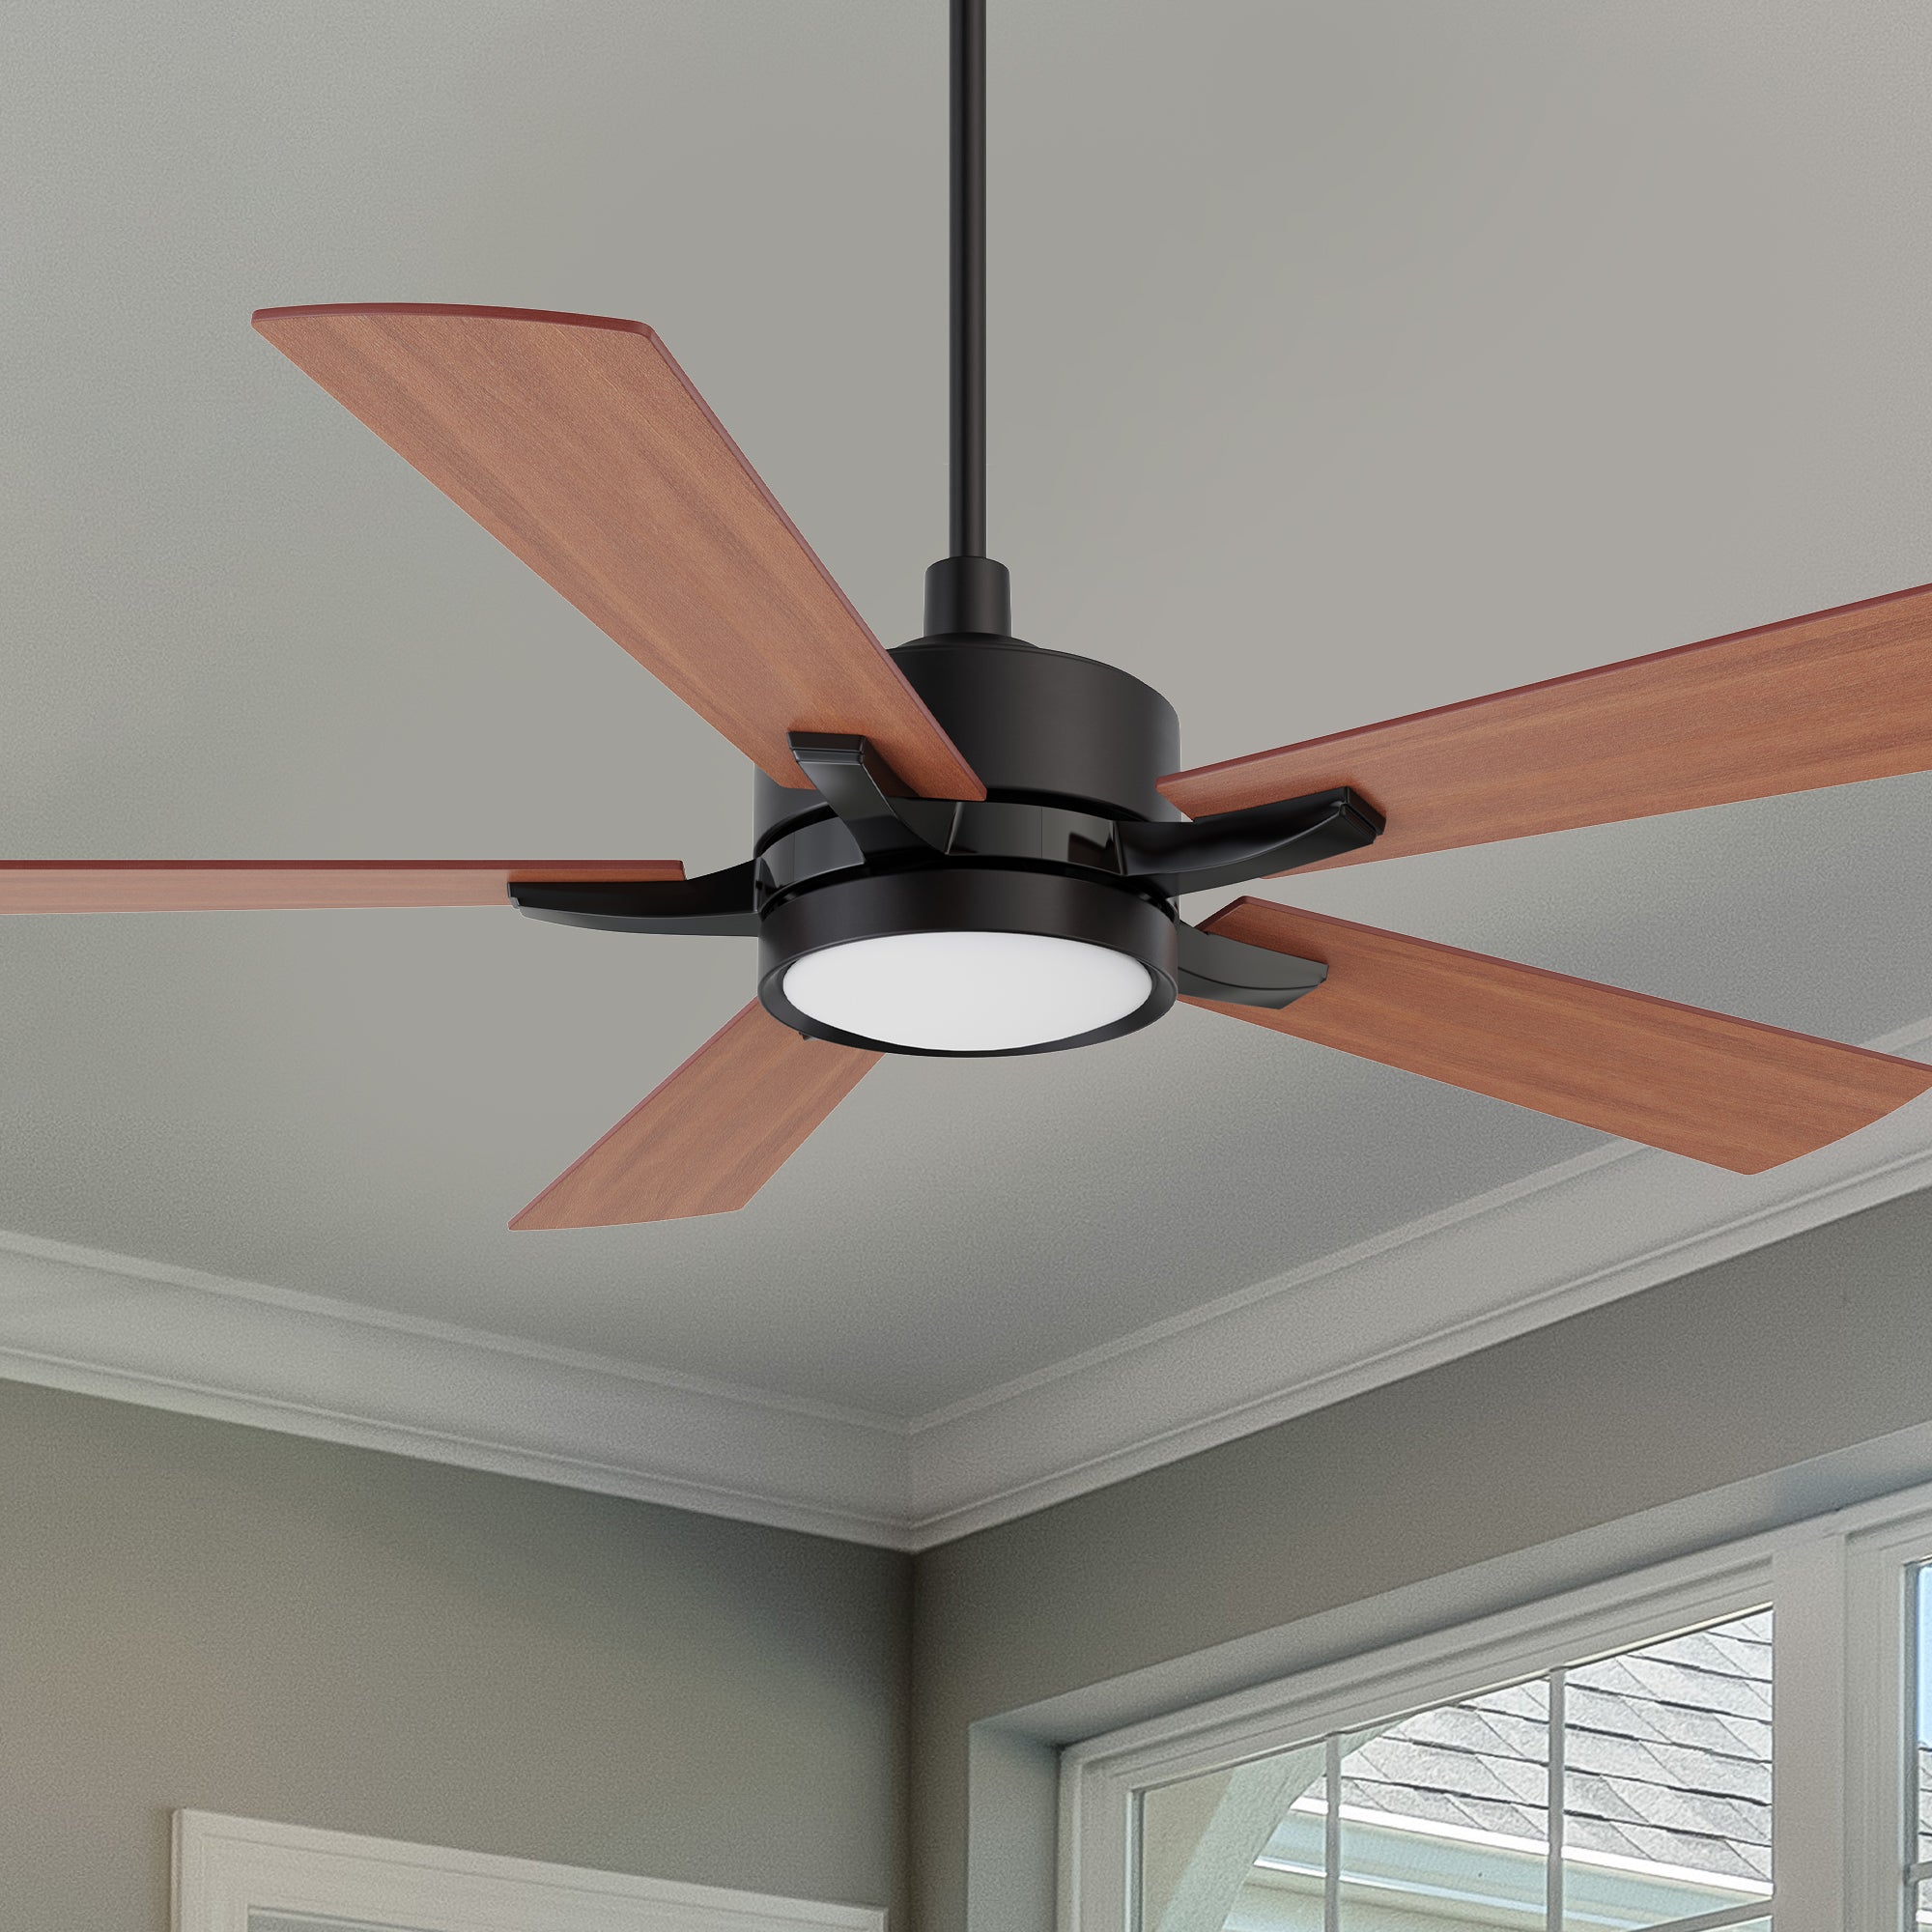 Sheffield 56 inch Ceiling Fan with LED Light and Remote Control